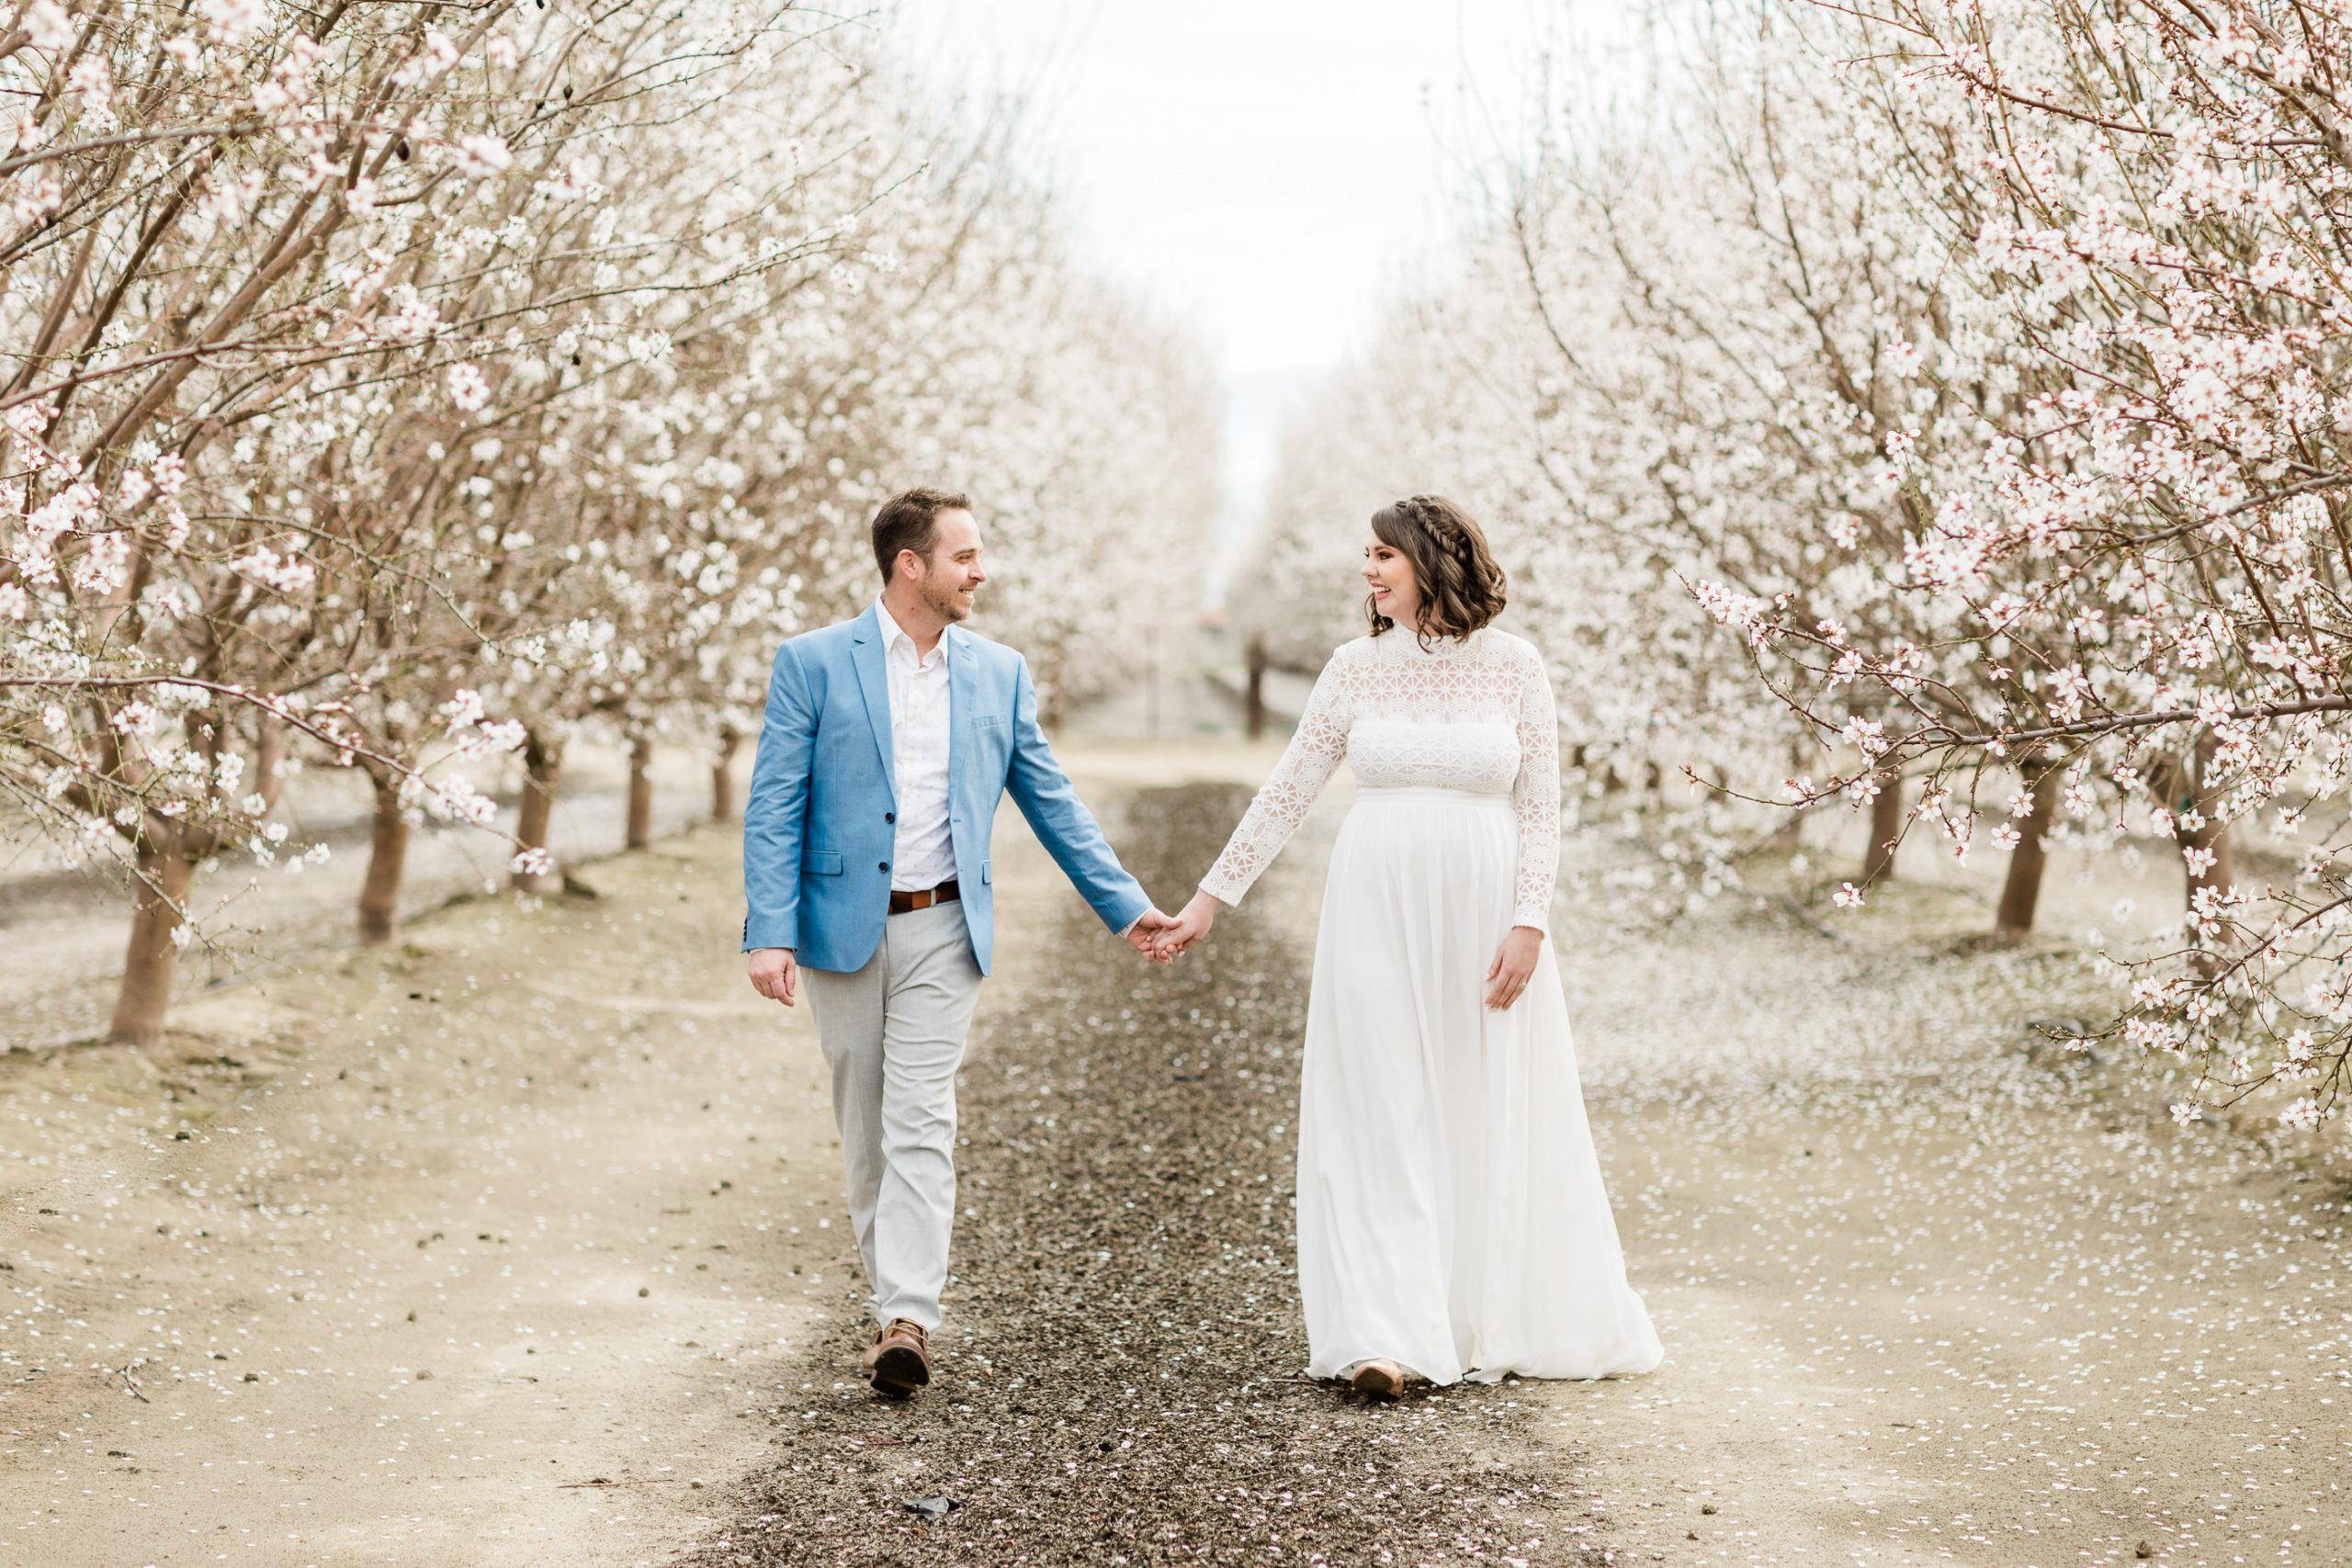 central valley almond orchard, bakersfield california, engagement session 